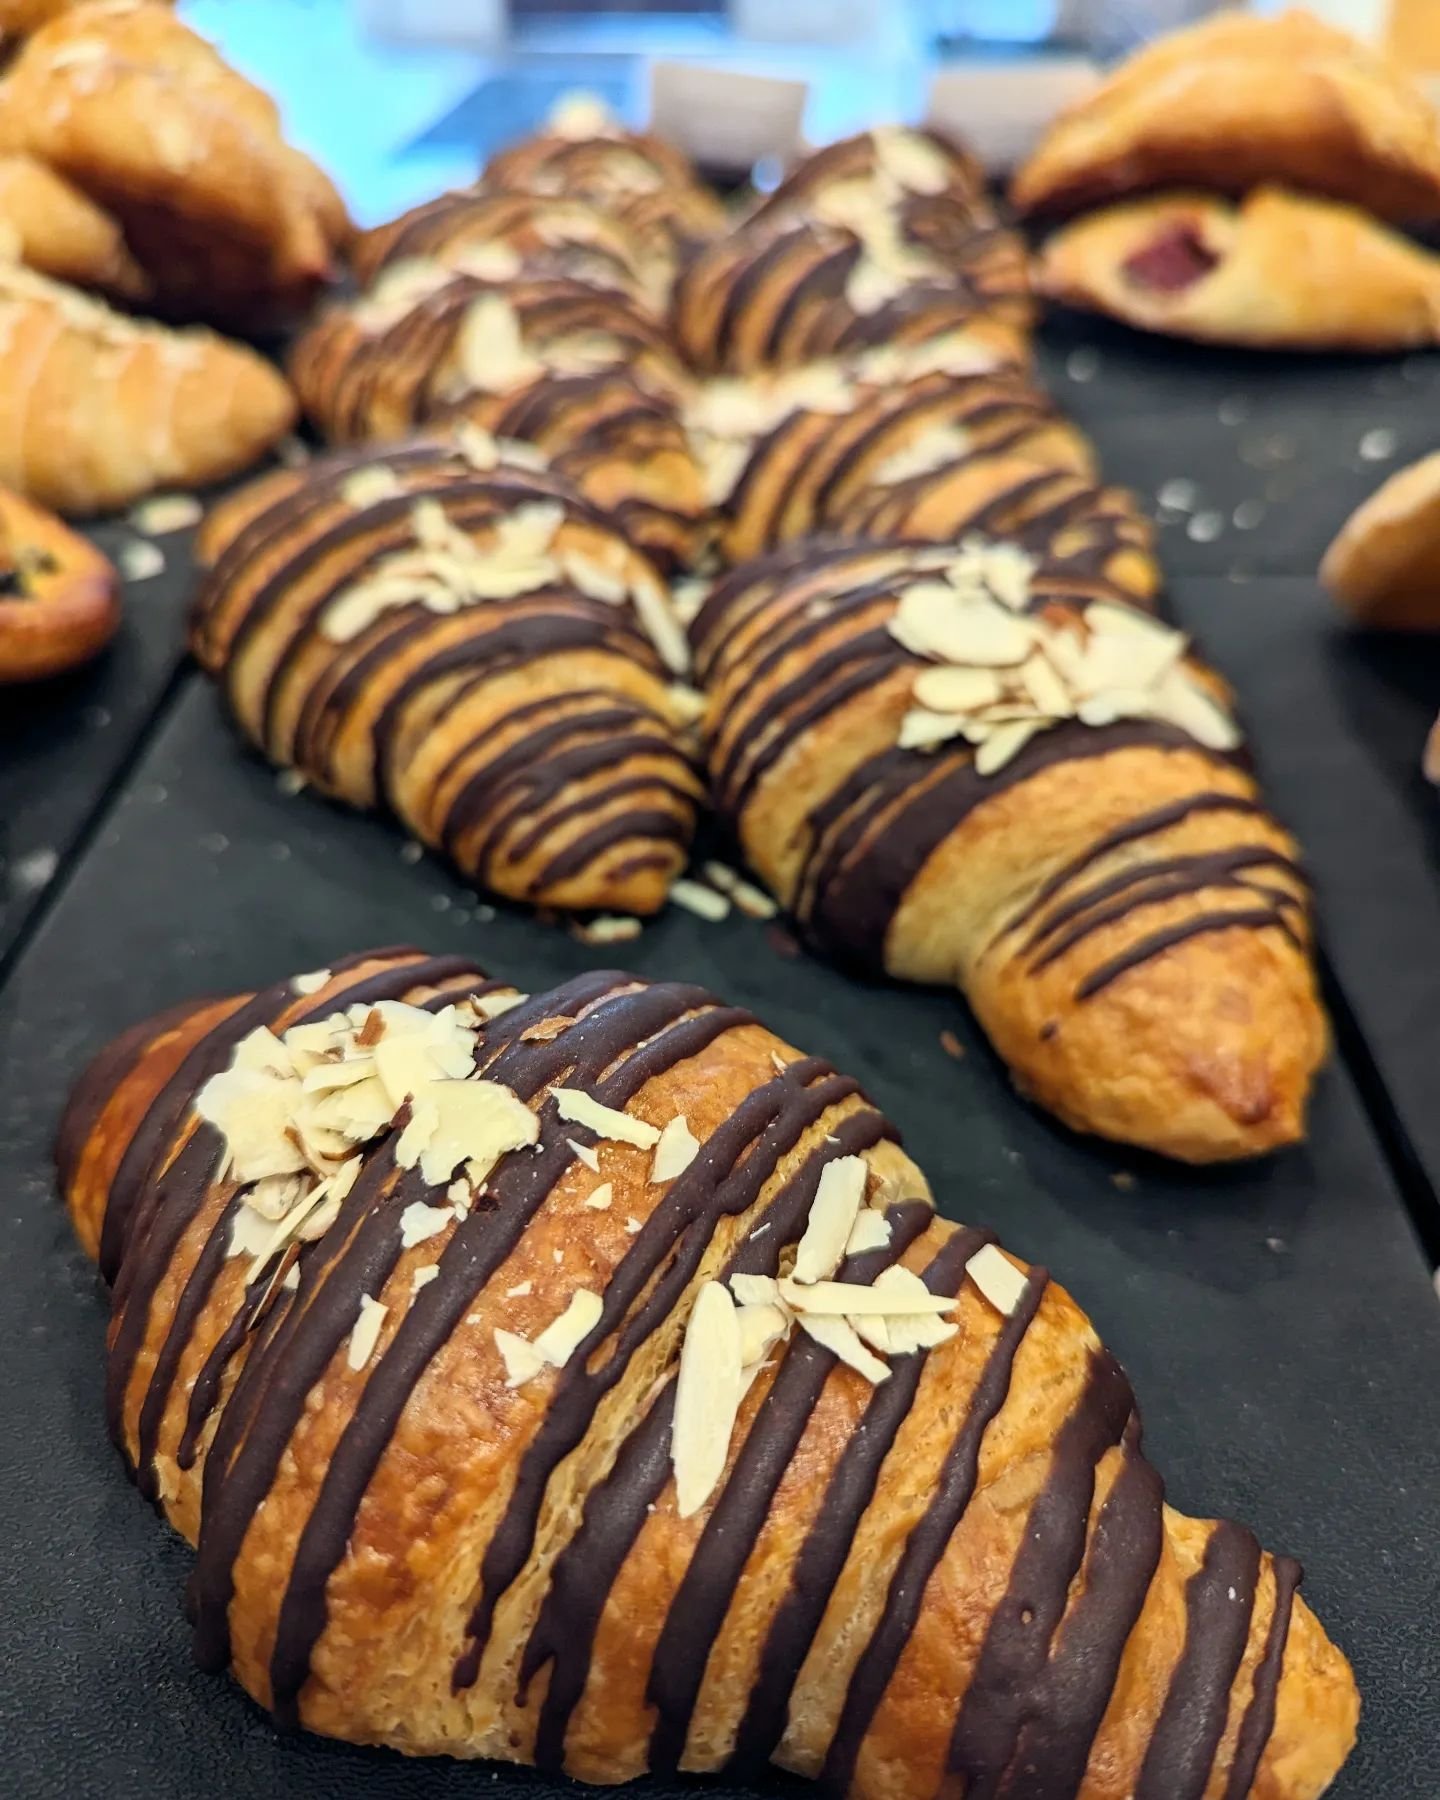 It's the final days of our chocolate orange croissant!

We stretched it out well past citrus season because it was so good. Don't fret, it'll be back next season! And in its place we've got all sorts of summer pastries in the works using in season, l